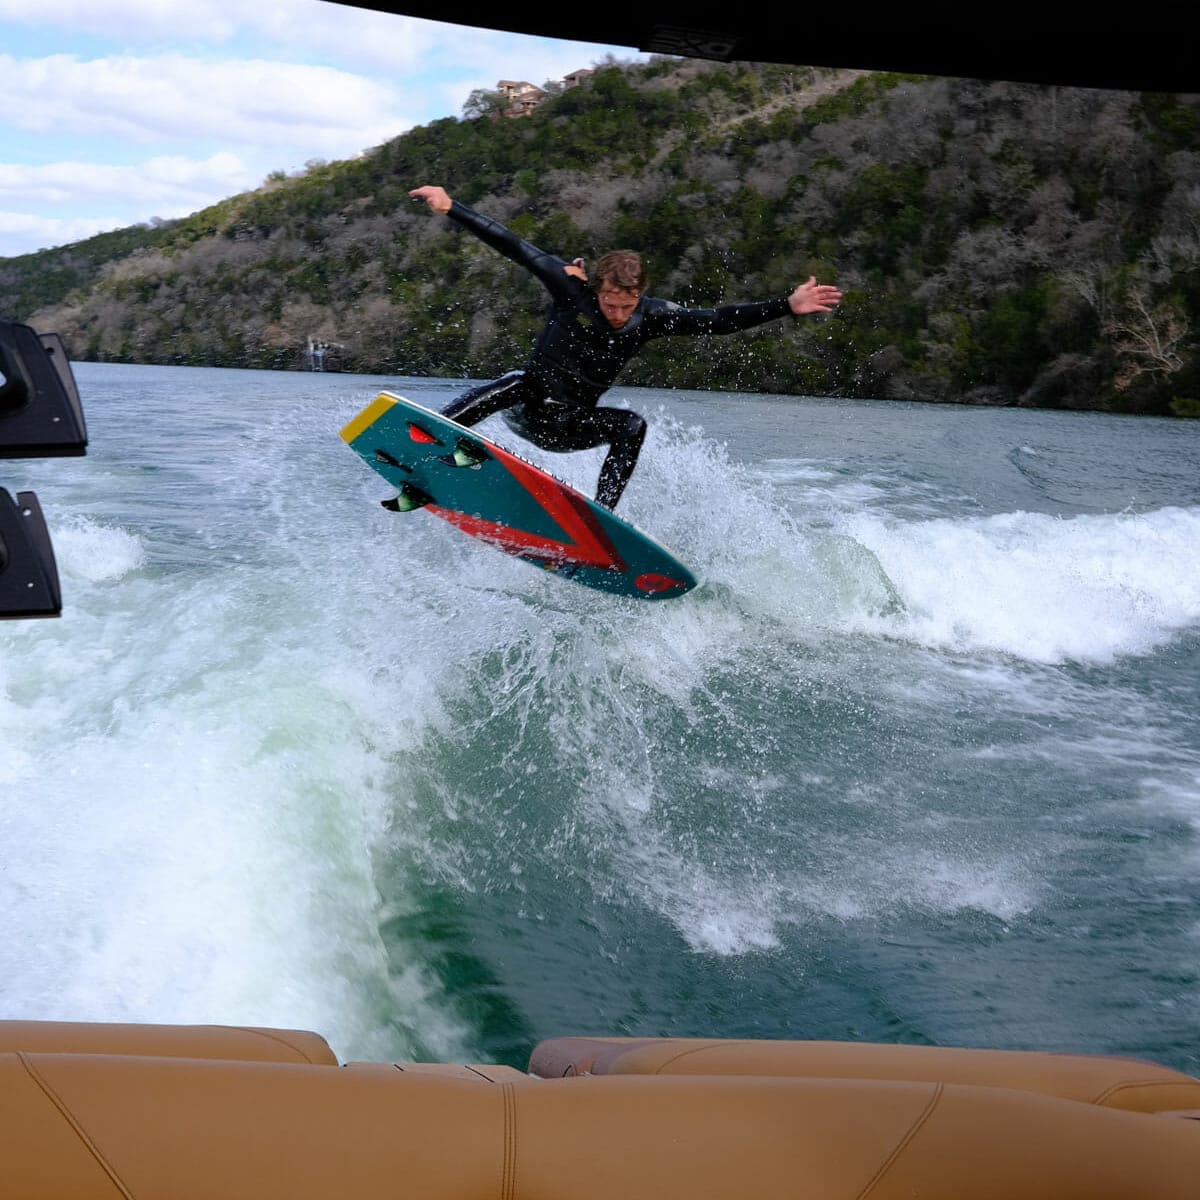 A man is riding a wakesurf board in the water.